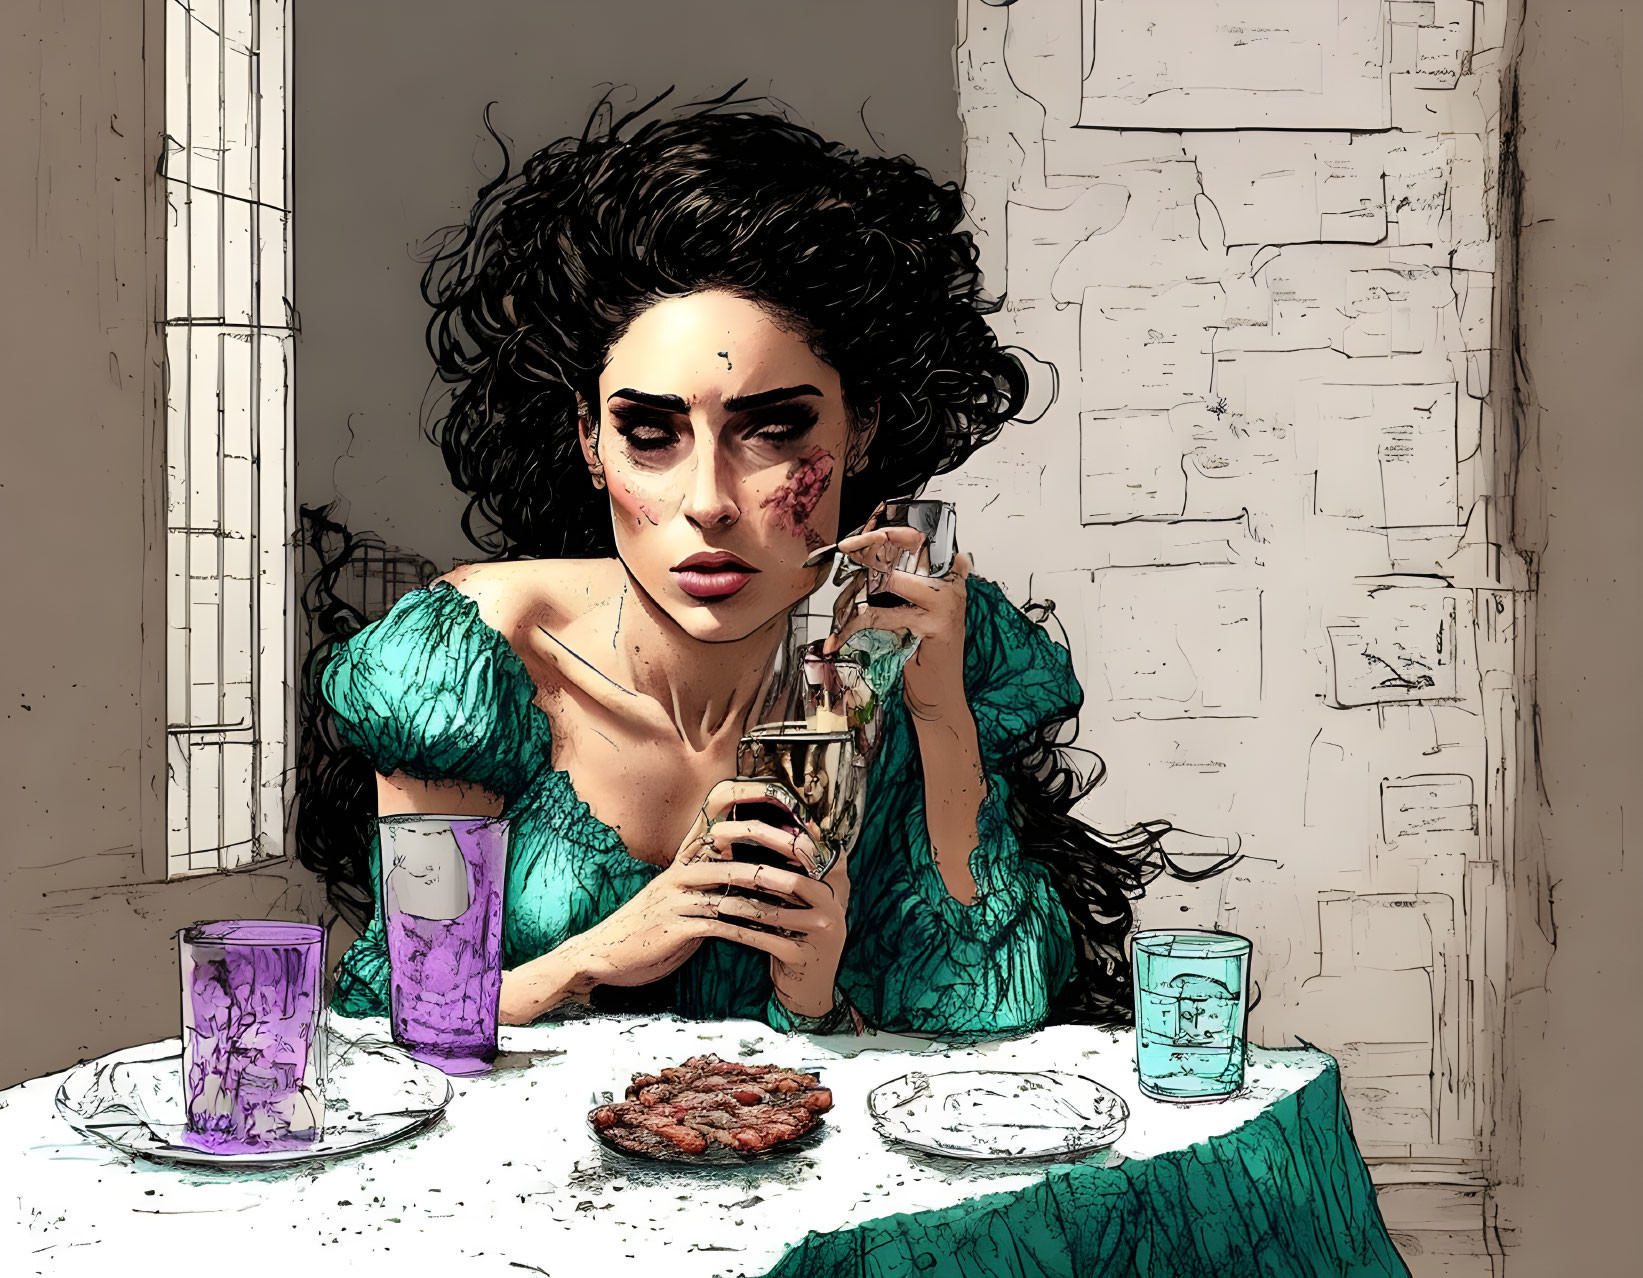 Illustration of woman with dark hair sitting at table with drink and cookies.